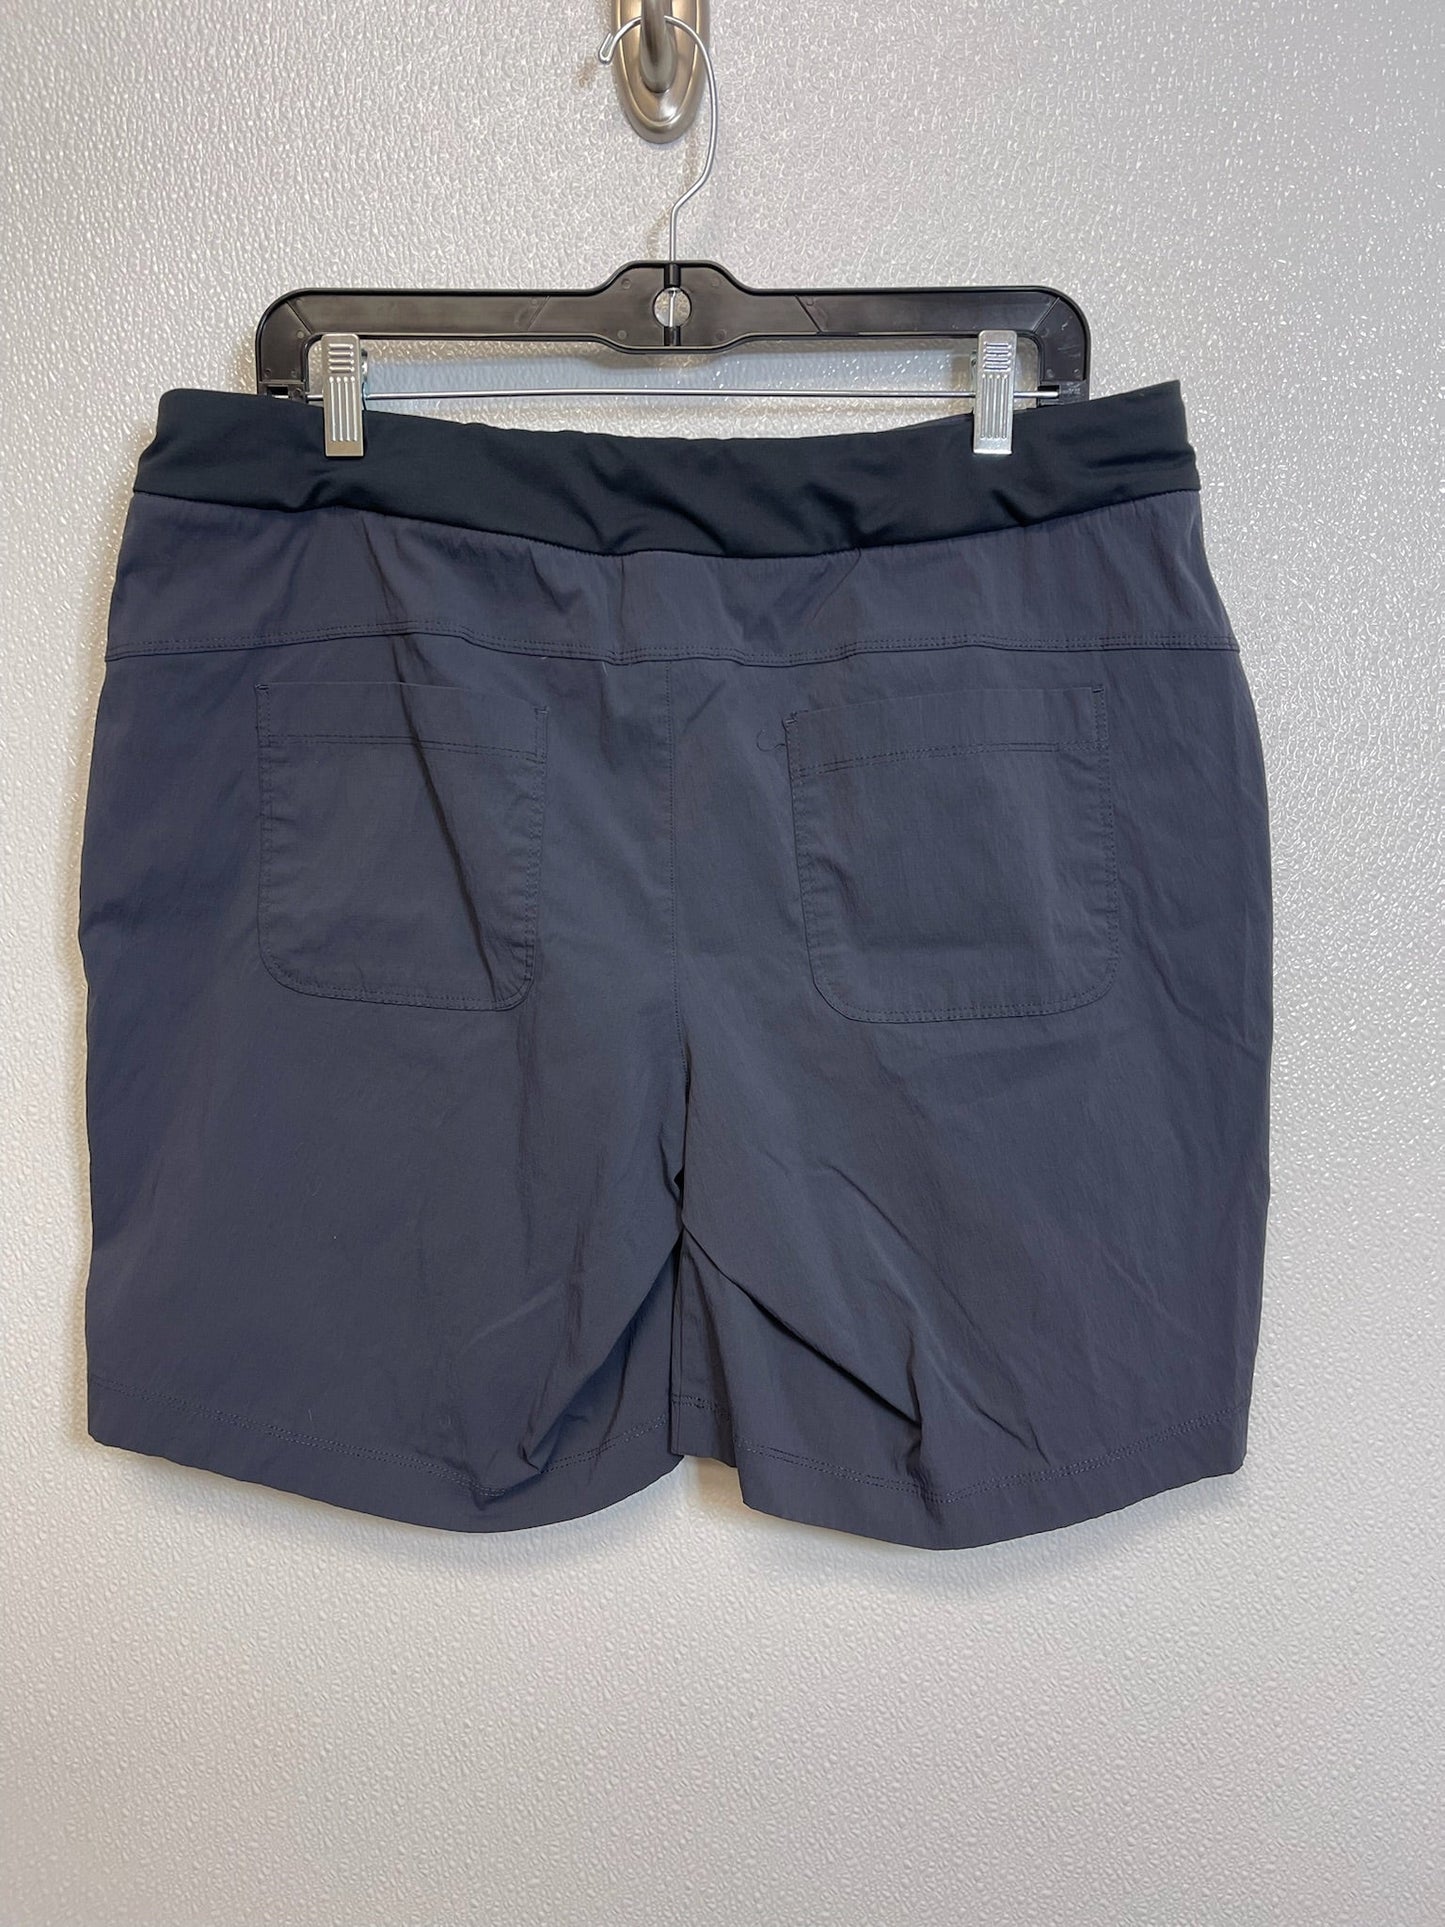 Charcoal Athletic Shorts Active Life, Size L